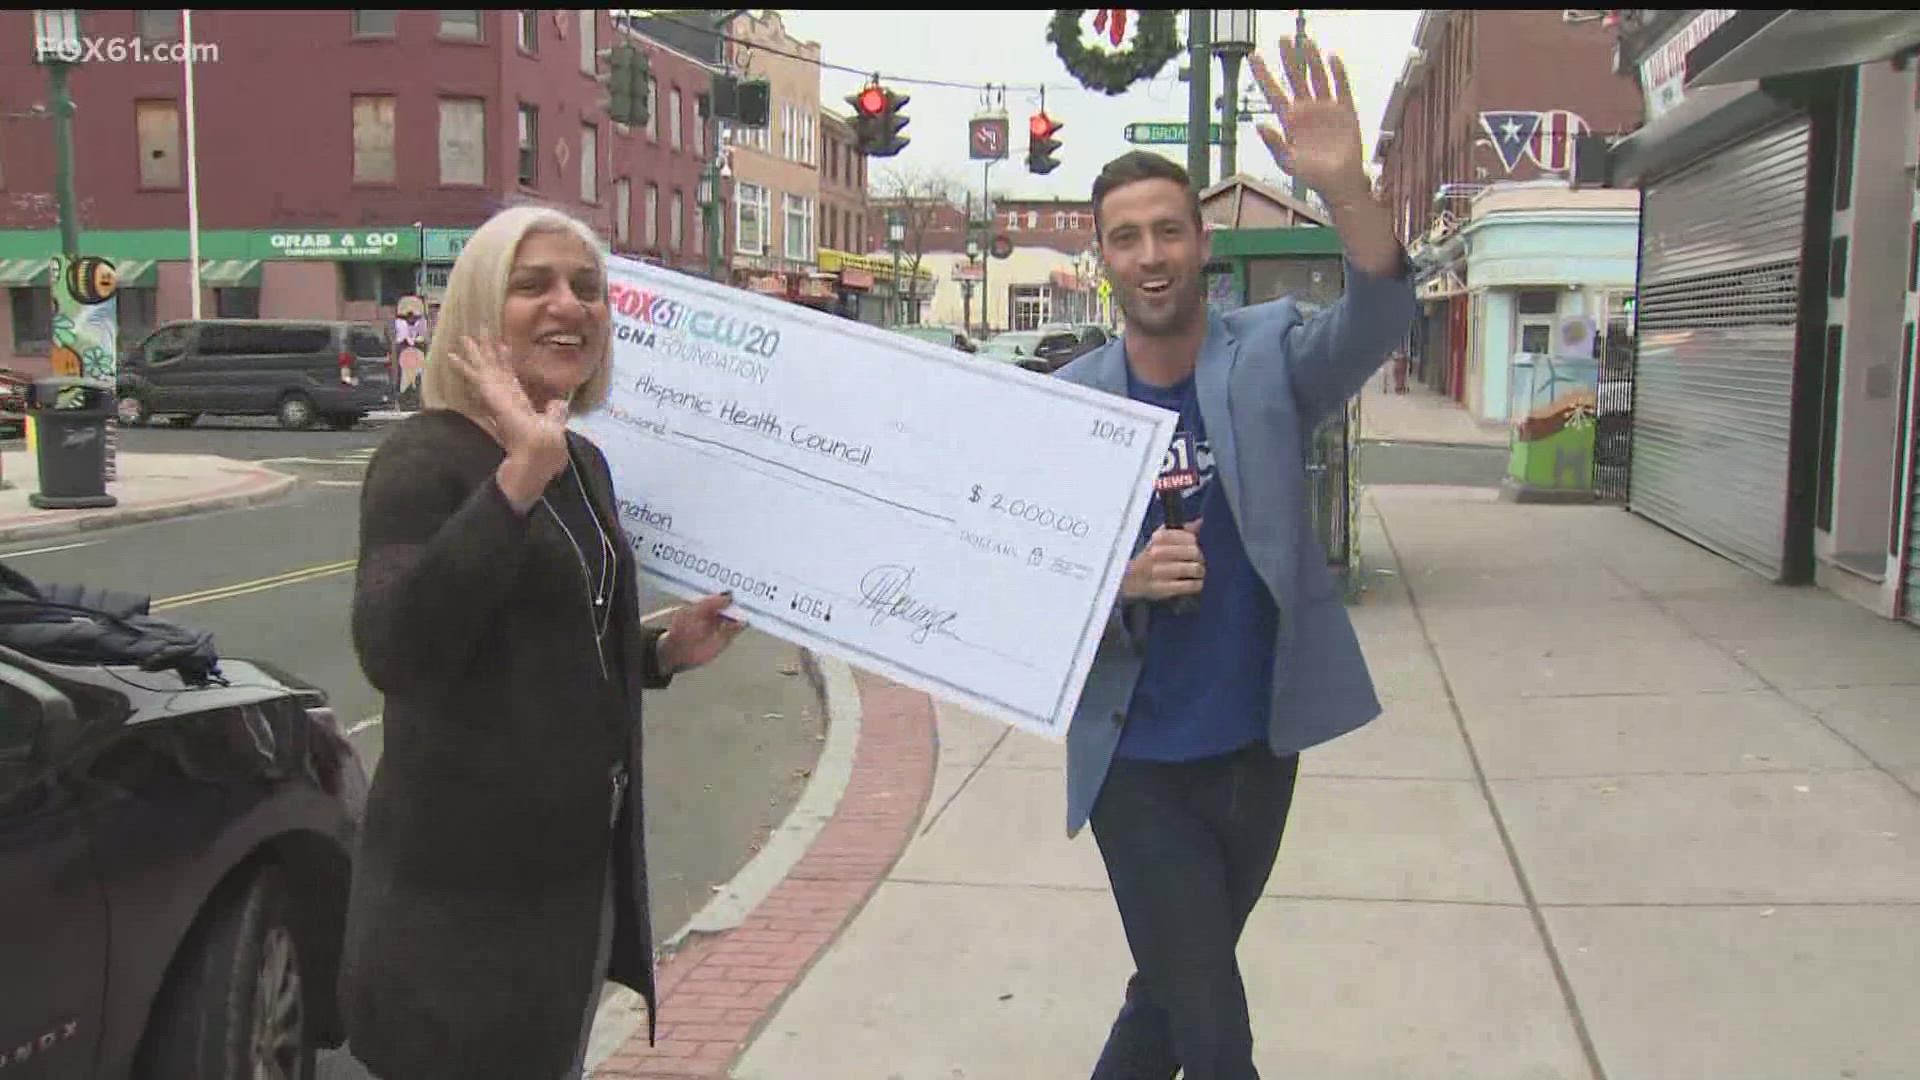 The Hispanic Health Council in Hartford is undergoing construction on Park Street. FOX61/TEGNA Foundation presented a check to HHC for the work they do in the city.